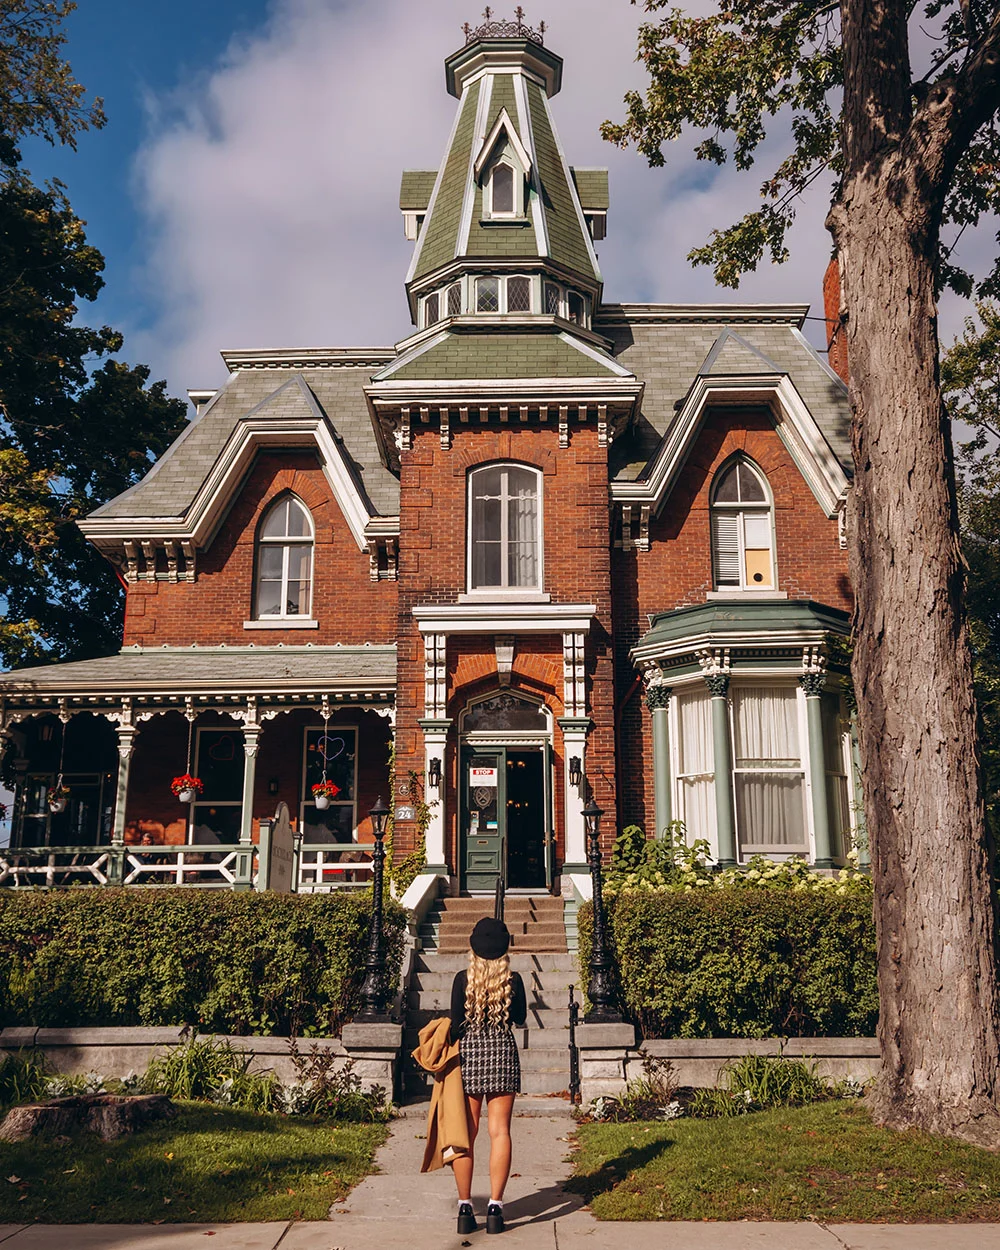 Planning a trip to Kingston soon with the goal of taking some amazing pictures while you're there? This guide to the most instagrammable places in Kingston Ontario is for you! From the gorgeous old architecture and historic buildings, European influence you’ll find all lover, and the incredibly unique alleys and cafes, there’s more than enough places to snap your next instagram photo. If you’re planning a visit to Kingston soon you definitely don’t want to miss this guide to the best photo spots in Kingston. Pictured here: Hochelaga Inn